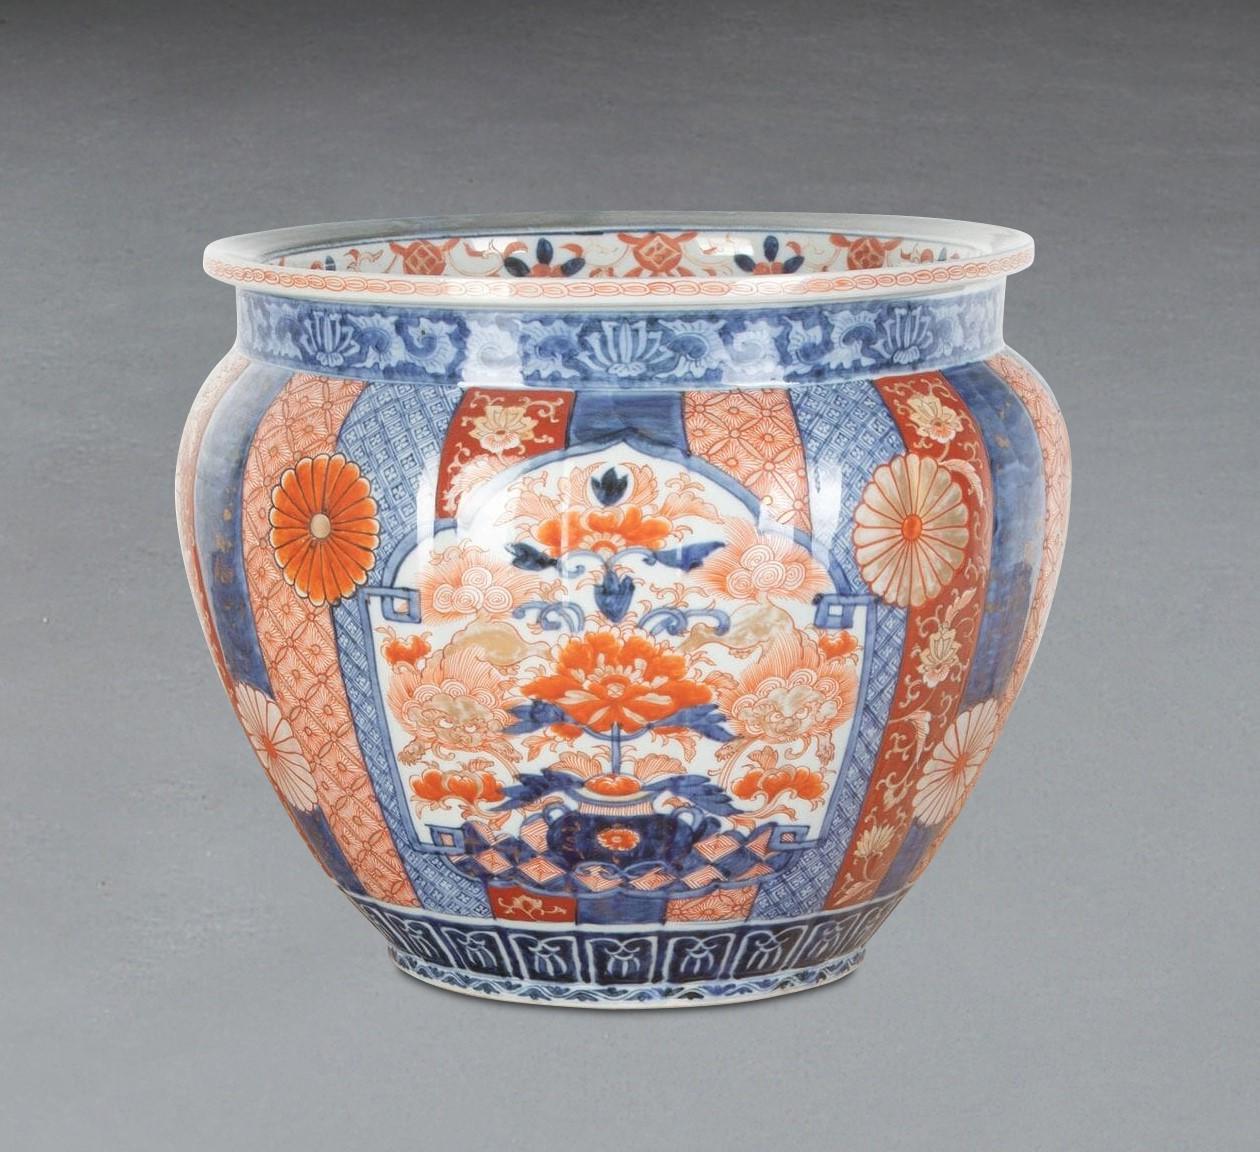 A large 19th Century Japanese Imari Bowl of ribbed form with colourful hand painted designs on each segment and centralised foliate panels and flower heads. In excellent condition. Circa 1880.

H: 28 cm (12